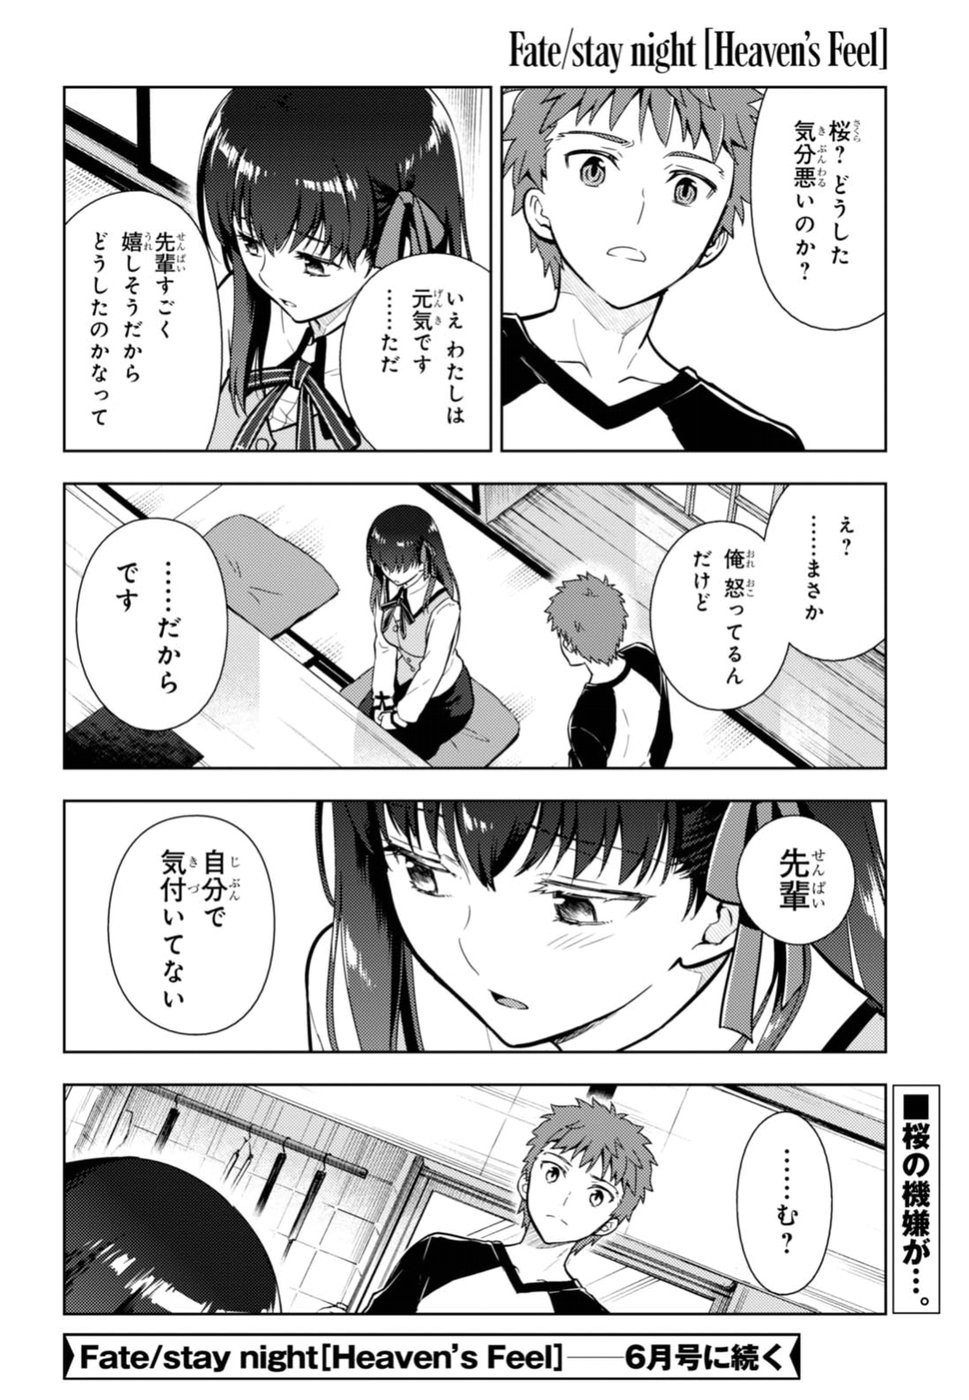 Fate/Stay night Heaven's Feel - Chapter 36 - Page 36